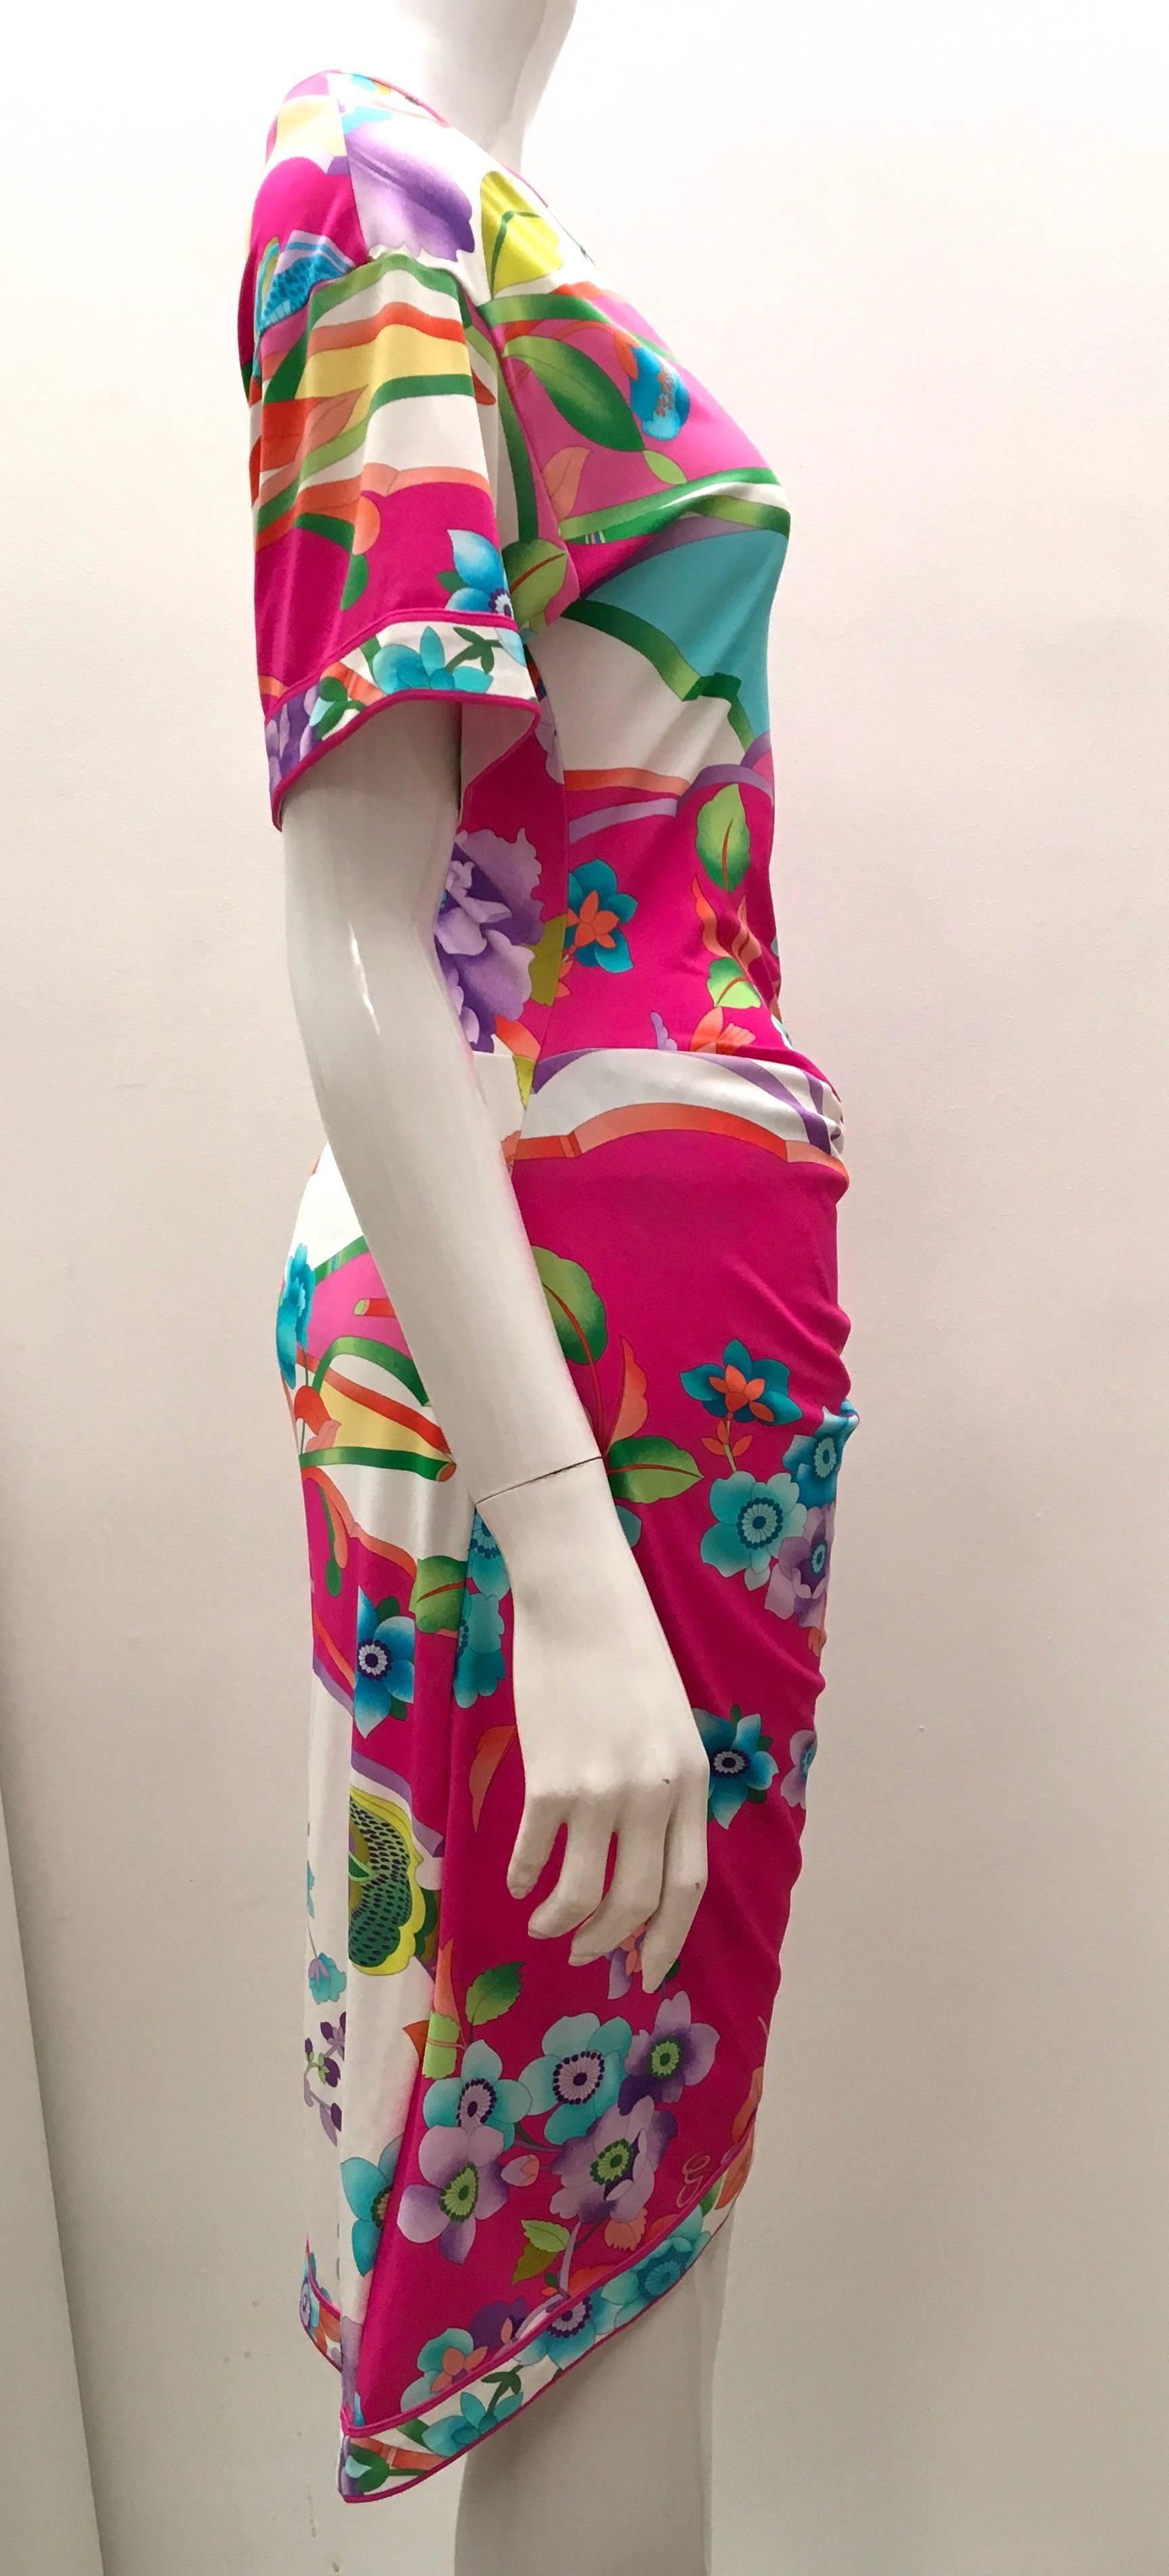 Presented here is a beautiful Leonard of Paris dress. The dress is a short sleeve new summer dress in size 38. The dress is a magnificent floral print. This dress is the typical vibrant Leonard floral pattern for which Leonard Paris is famous for. 